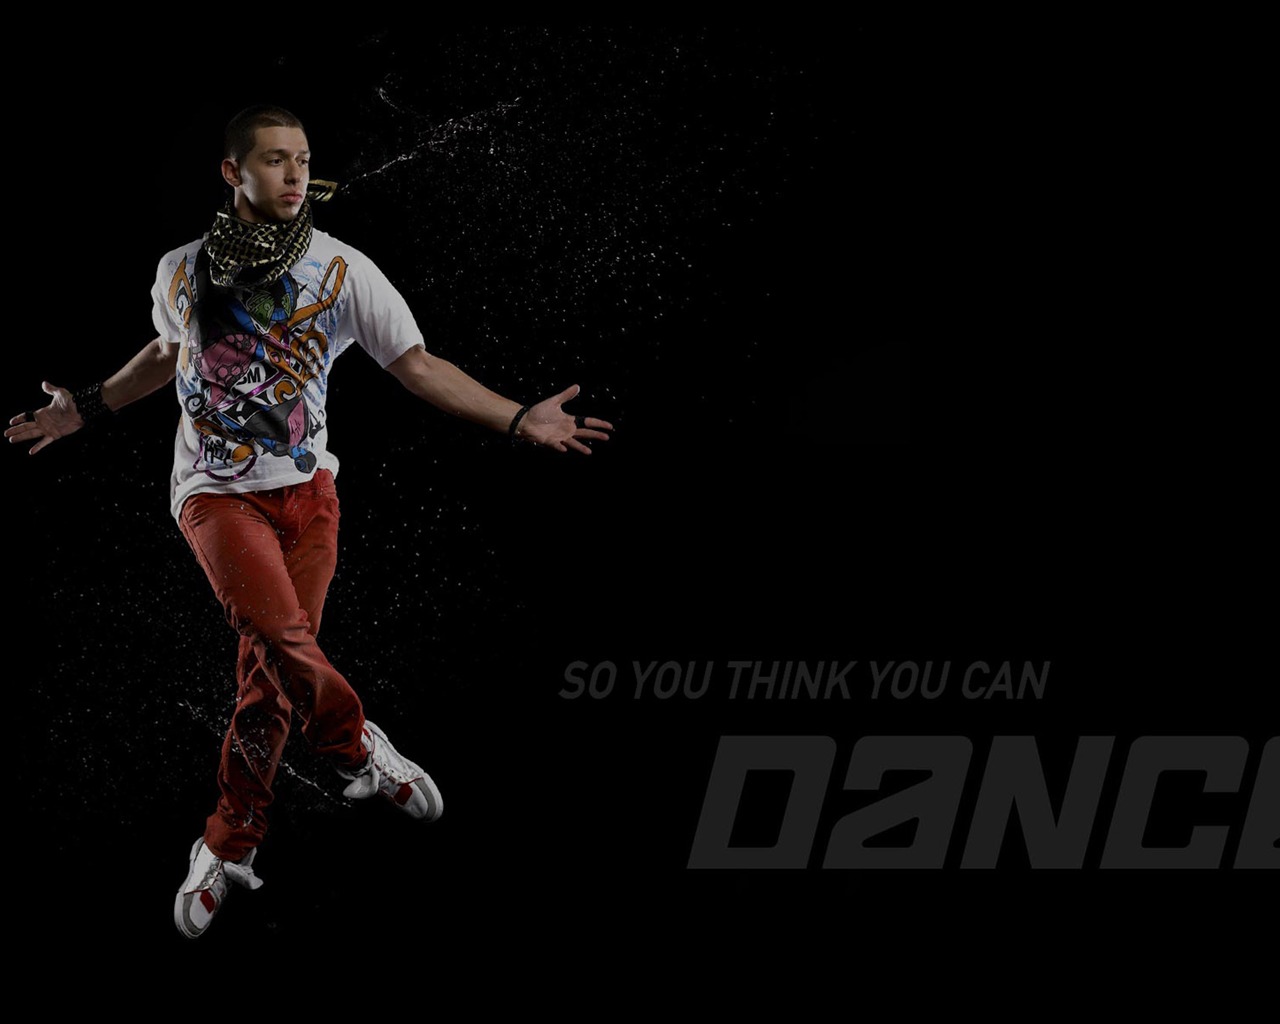 So You Think You Can Dance 舞林争霸 壁纸(一)16 - 1280x1024